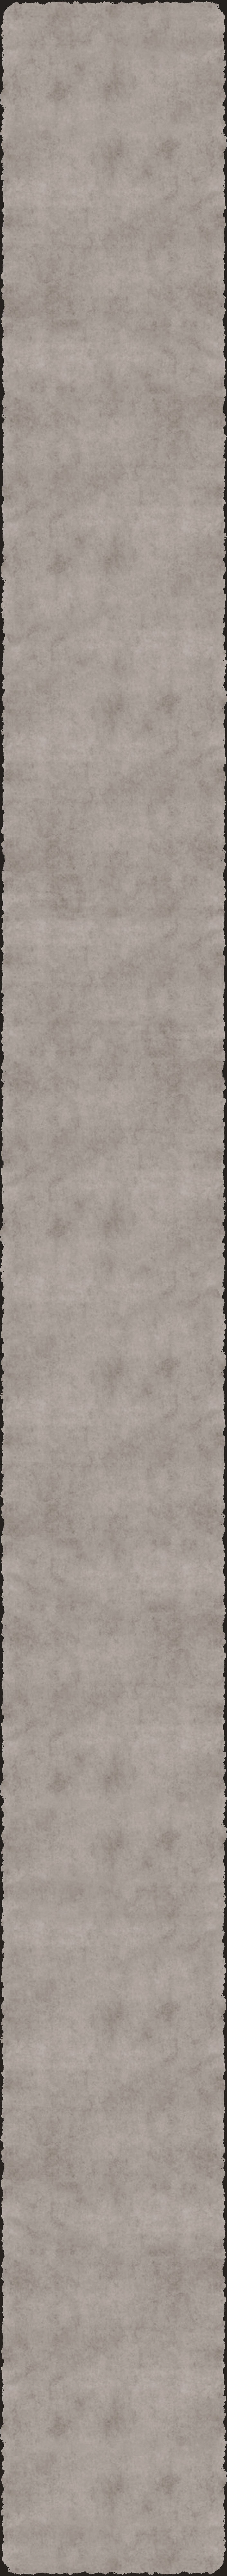 Parchment Background Image for My Projects: Screenshots, Page 4 on FlightToAtlantis.net